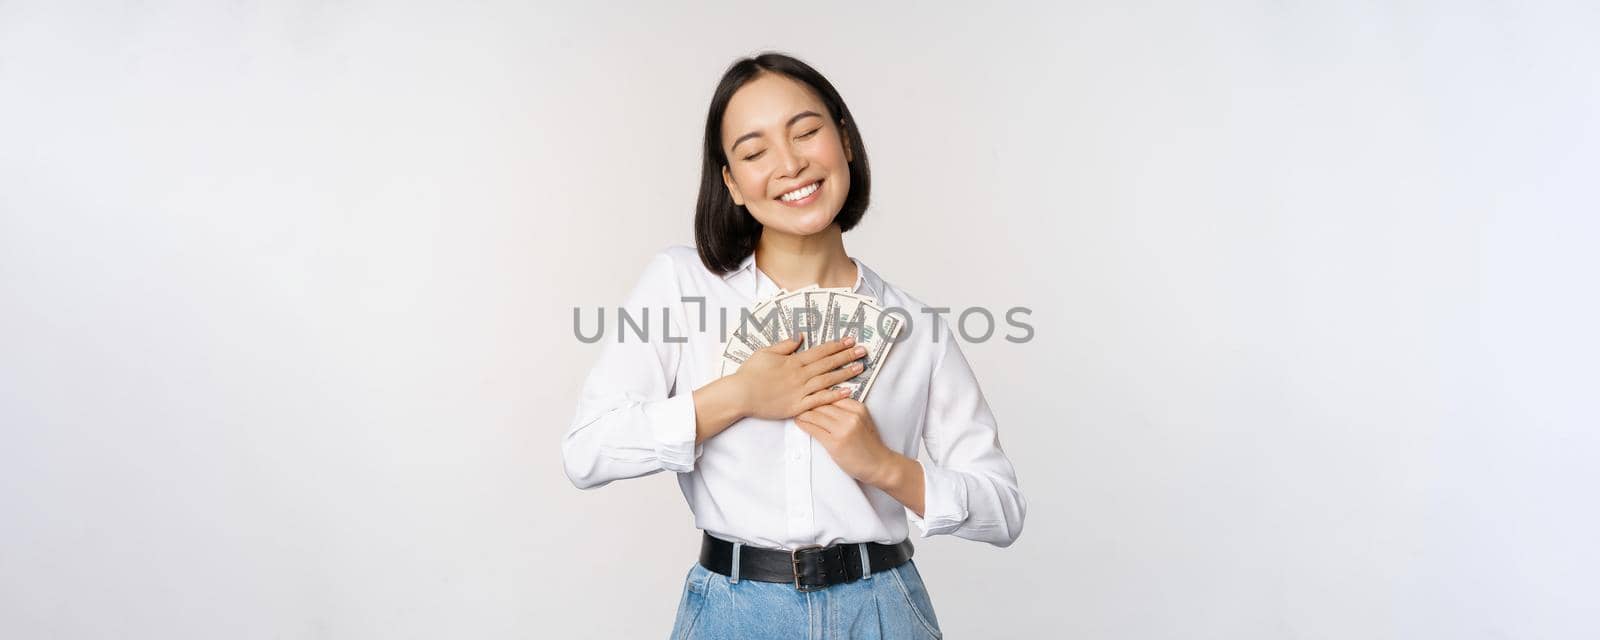 Happy asian woman hugging money dollars and smiling satisfied, standing over white background. Copy space